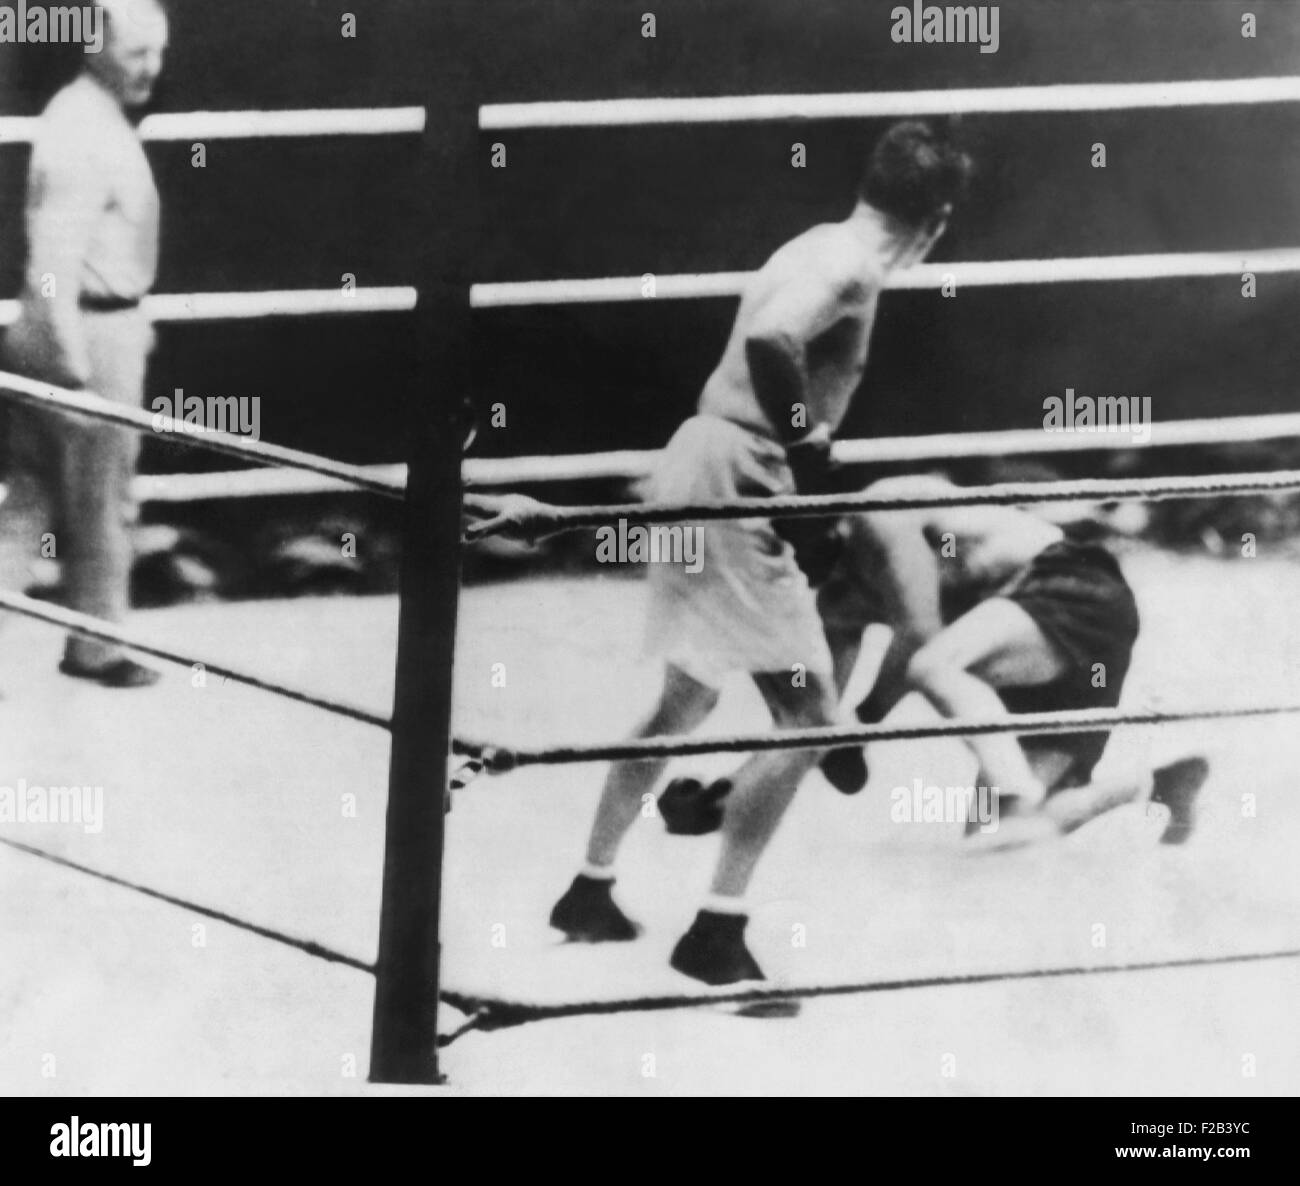 'Long Count Fight', the Gene Tunney-Jack Dempsey boxing match of Sept. 22, 1927. Tunney knocked Dempsey down in the 8th round, but got up immediately. - (CSU_2015_5_148) Stock Photo